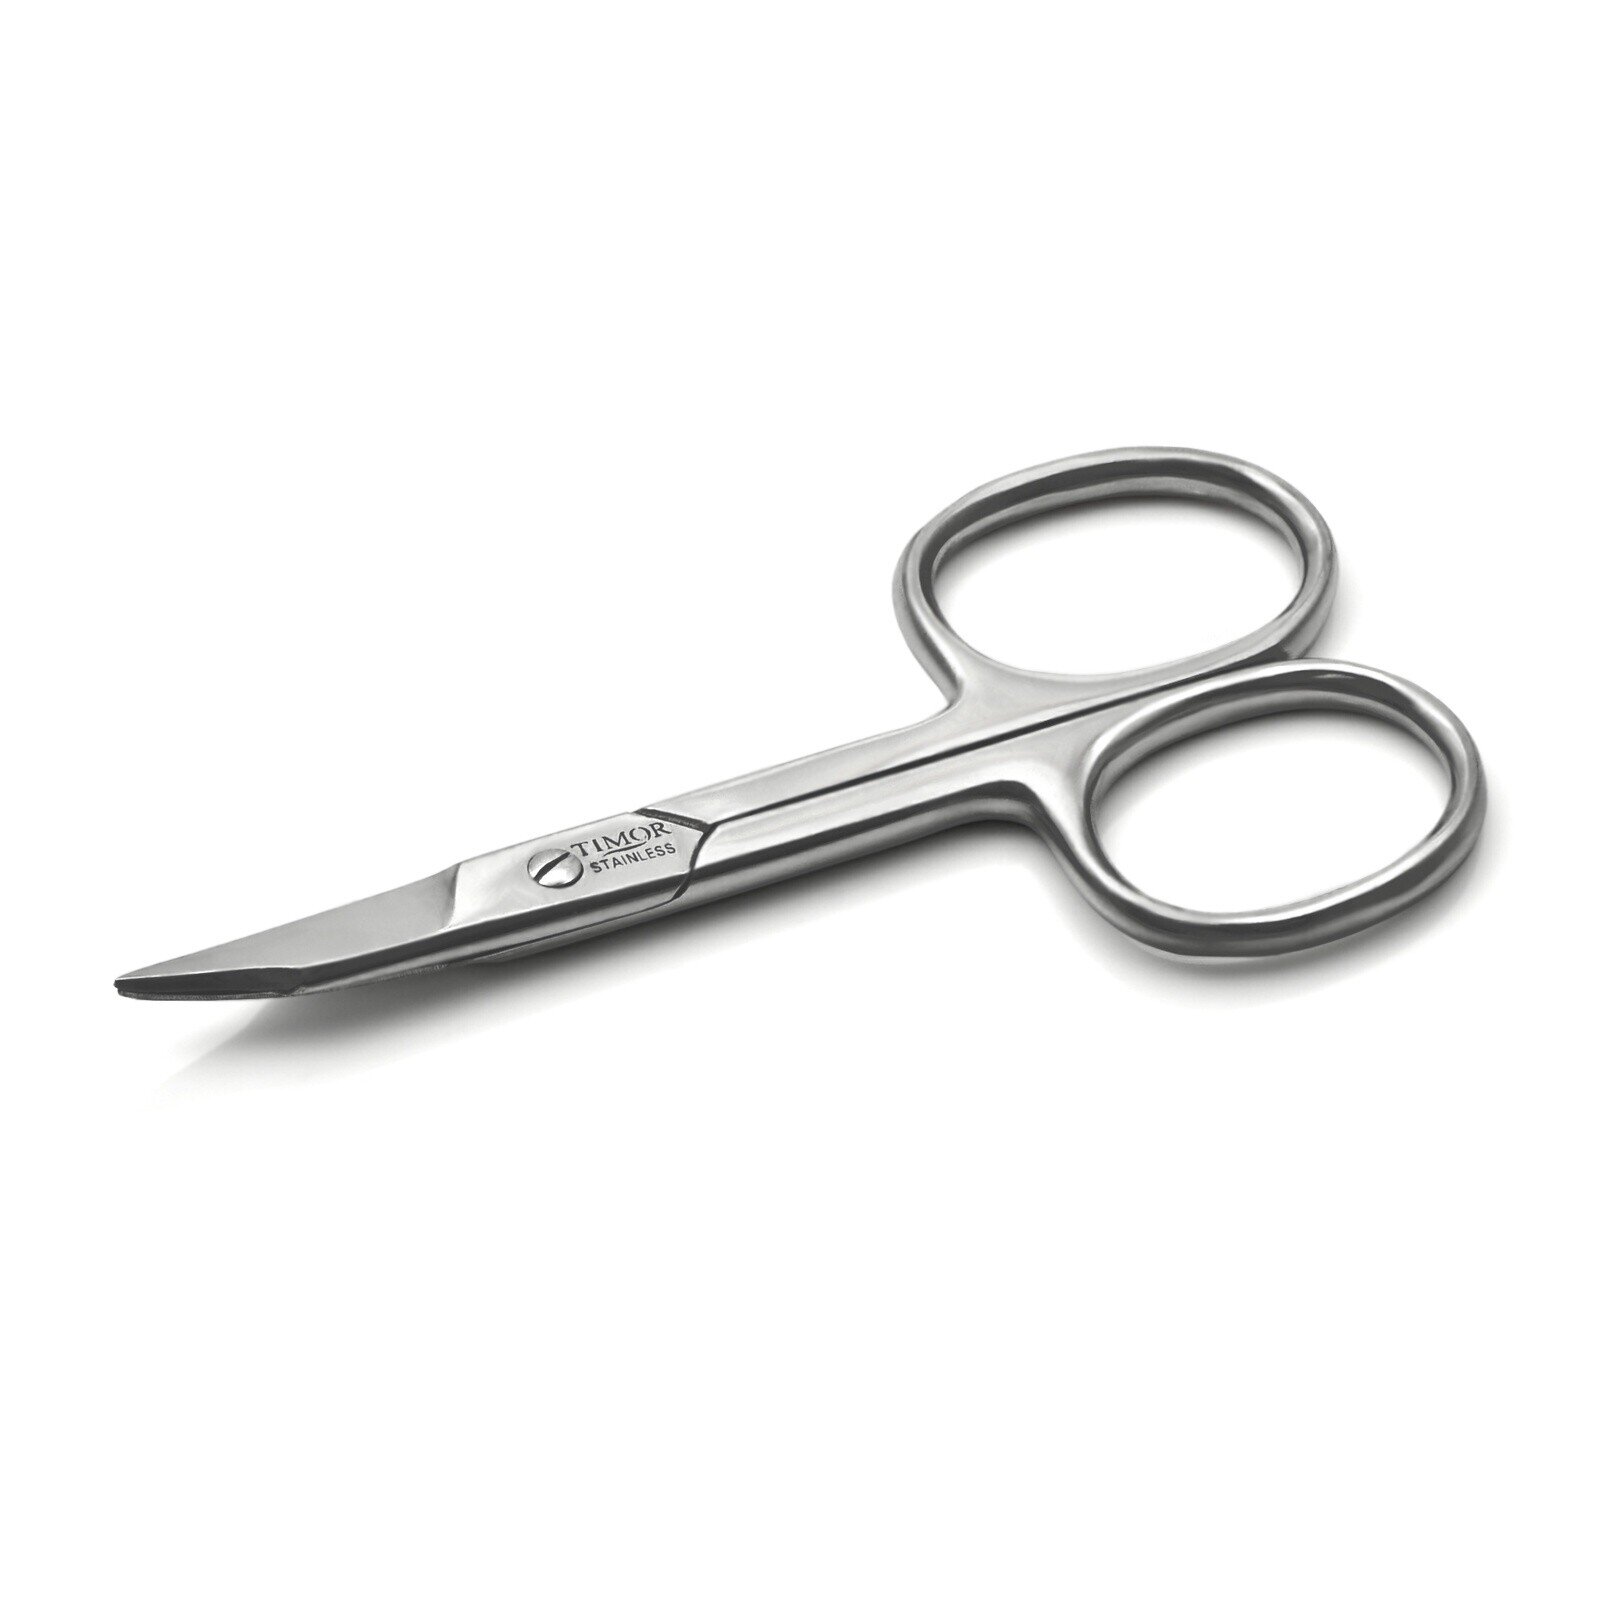 Timor 2-in-1 Combination Nail Scissors with tower tip blades for